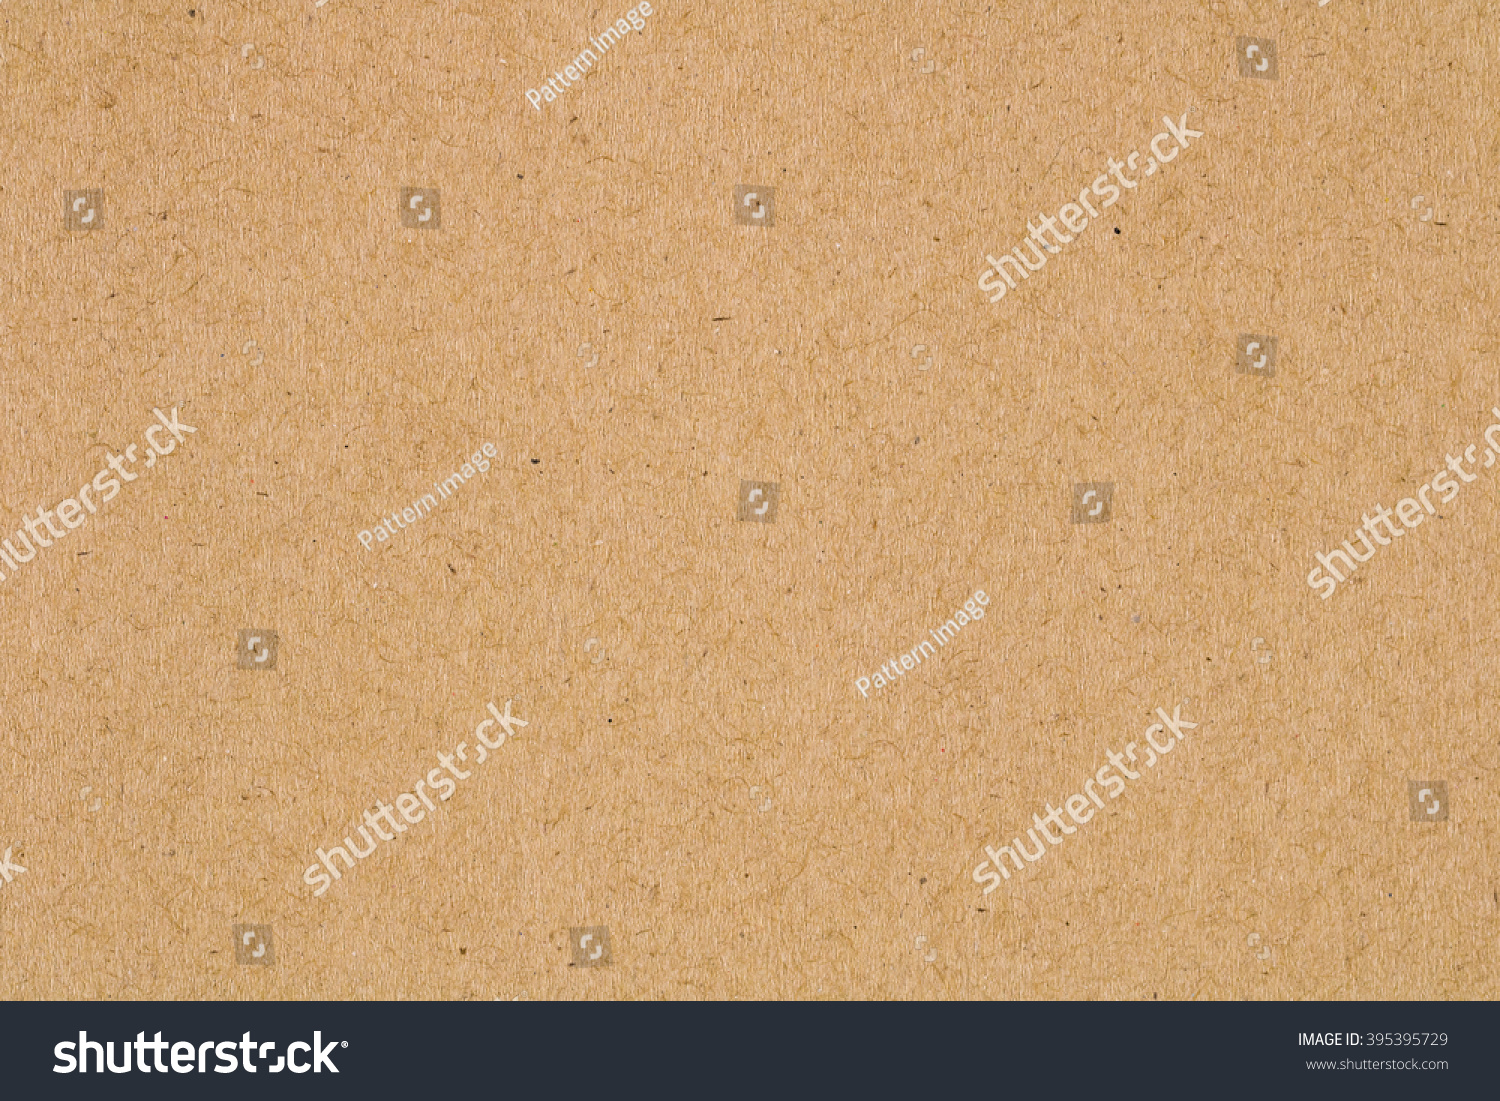 Brown paper close-up #395395729